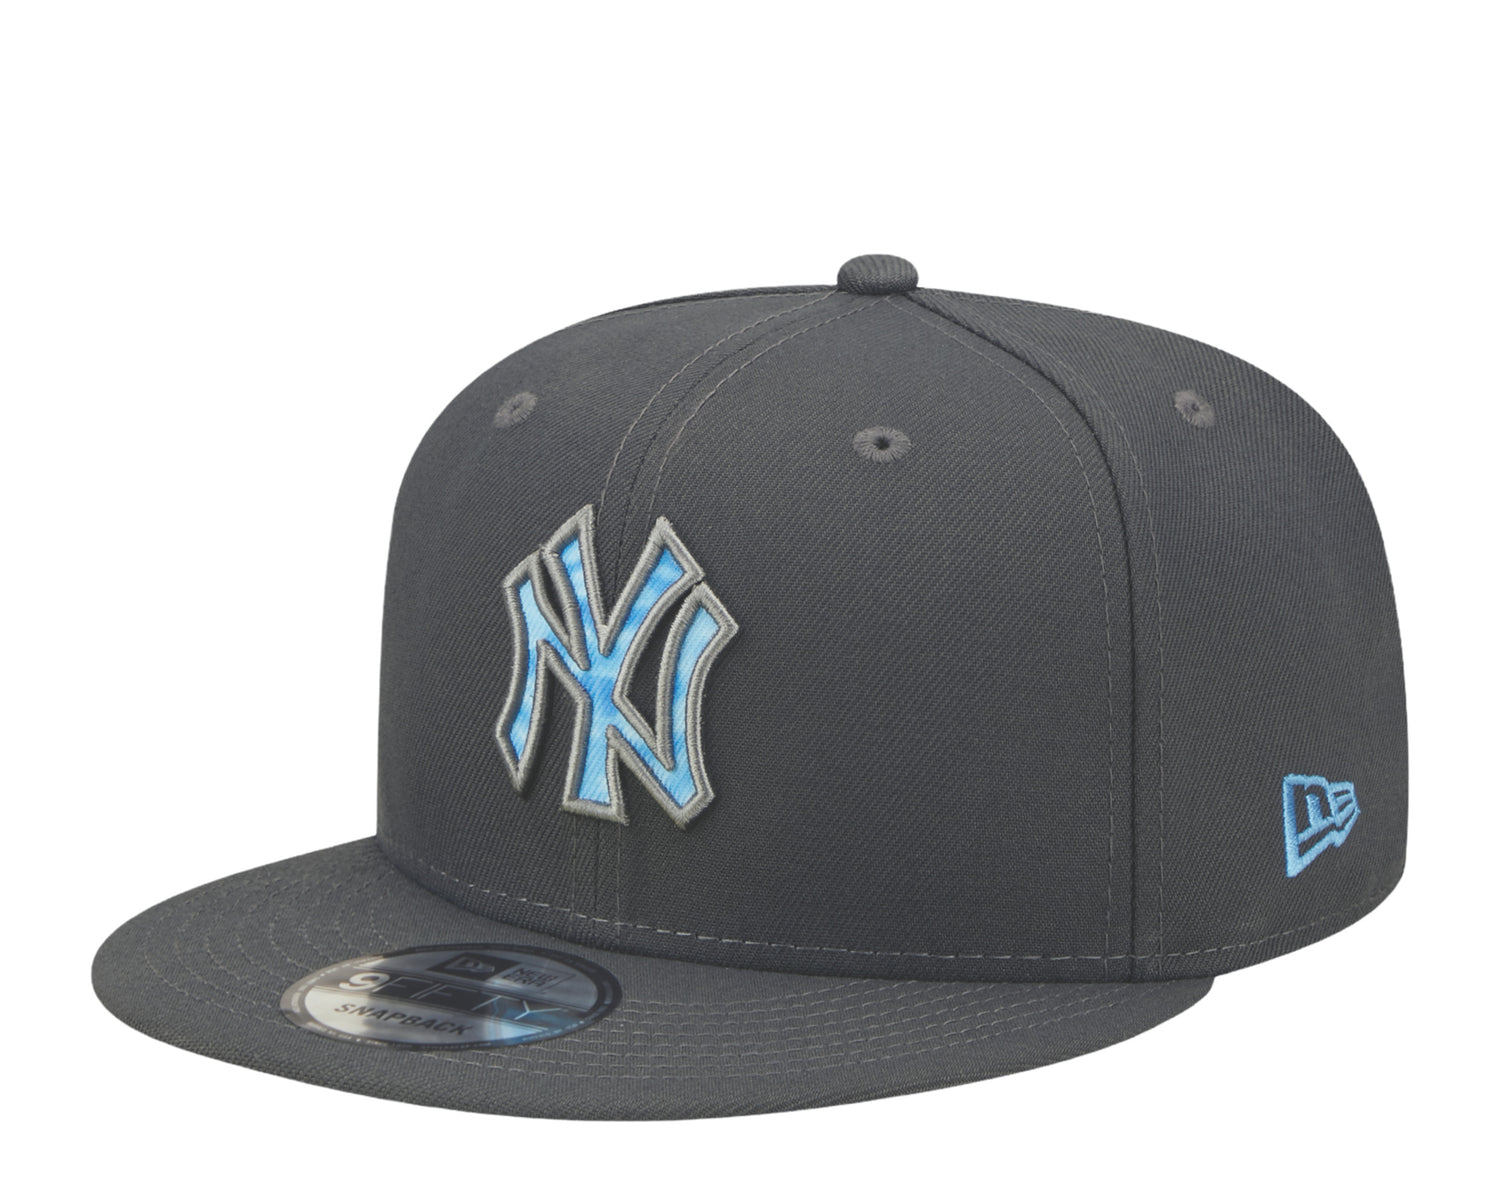 New Era 9Fifty MLB New York Yankees Father's Day Snapback Hat